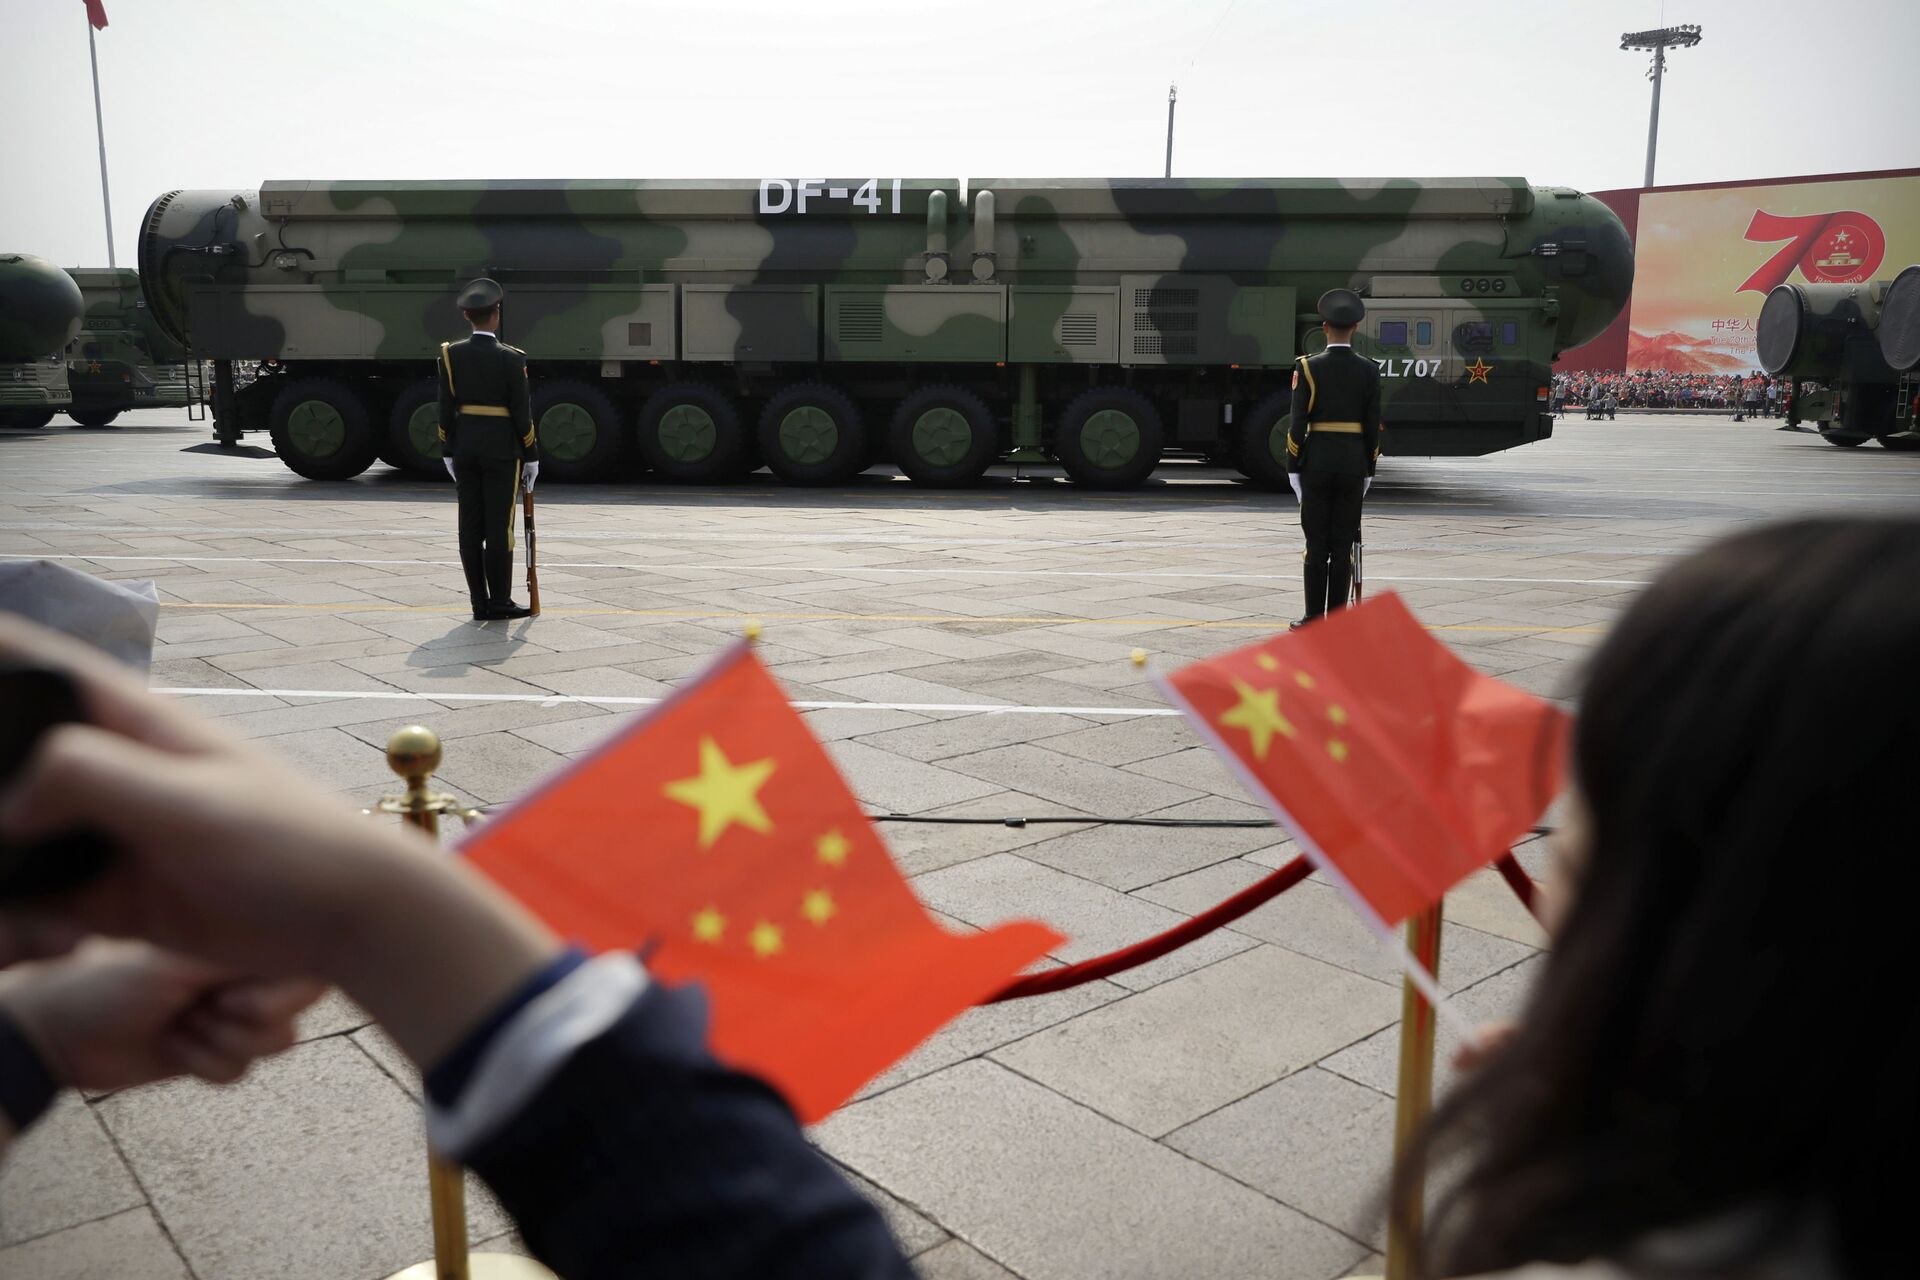 FILE - In this Oct. 1, 2019, file photo spectators wave Chinese flags as military vehicles carrying DF-41 ballistic missiles roll during a parade to commemorate the 70th anniversary of the founding of Communist China in Beijing. Trucks carrying weapons including a nuclear-armed missile designed to evade U.S. defenses rumbled through Beijing as the Communist Party celebrated its 70th anniversary in power - Sputnik International, 1920, 07.09.2021